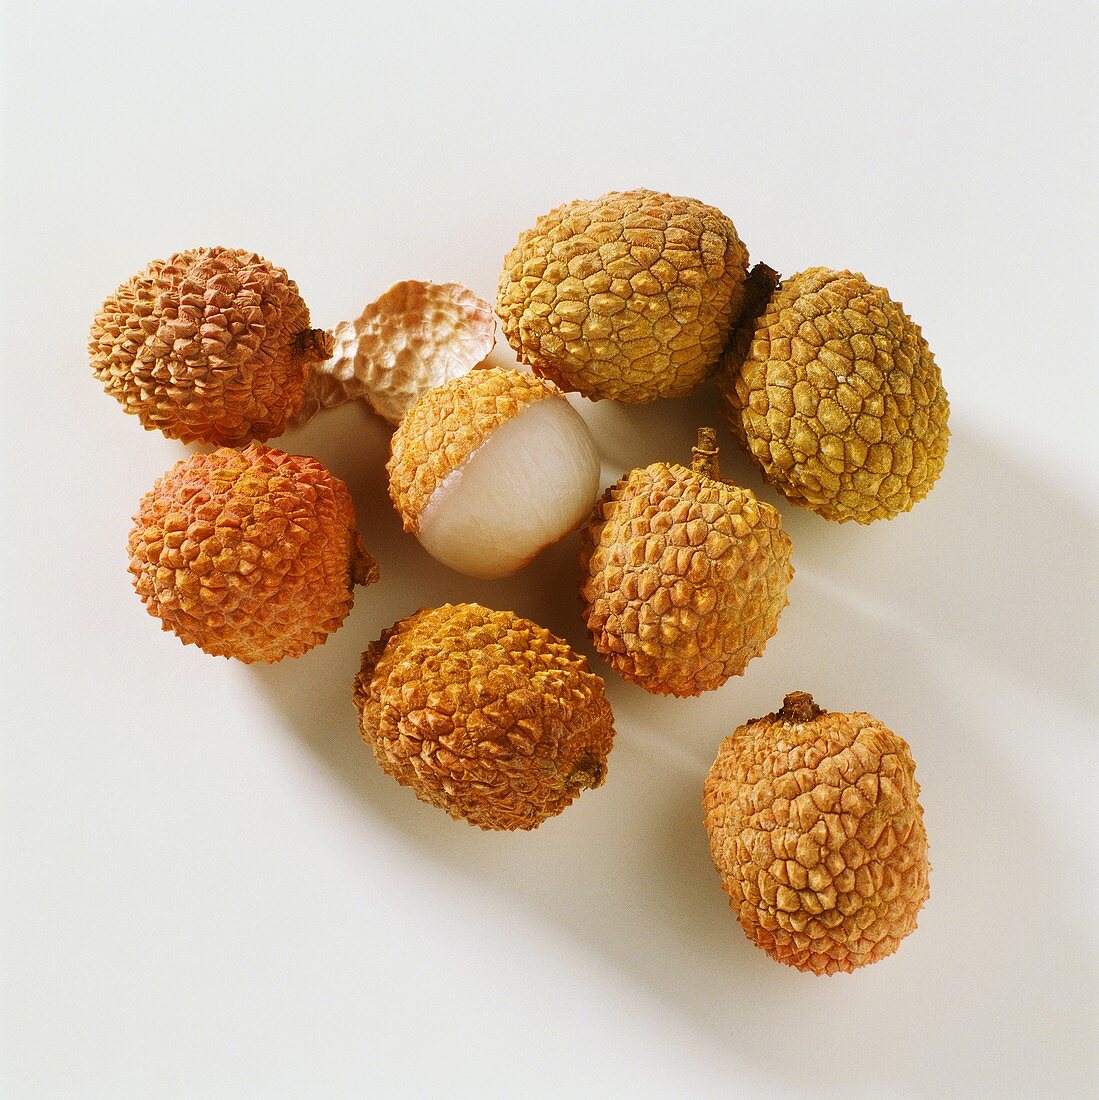 A few lychees with skin, one opened